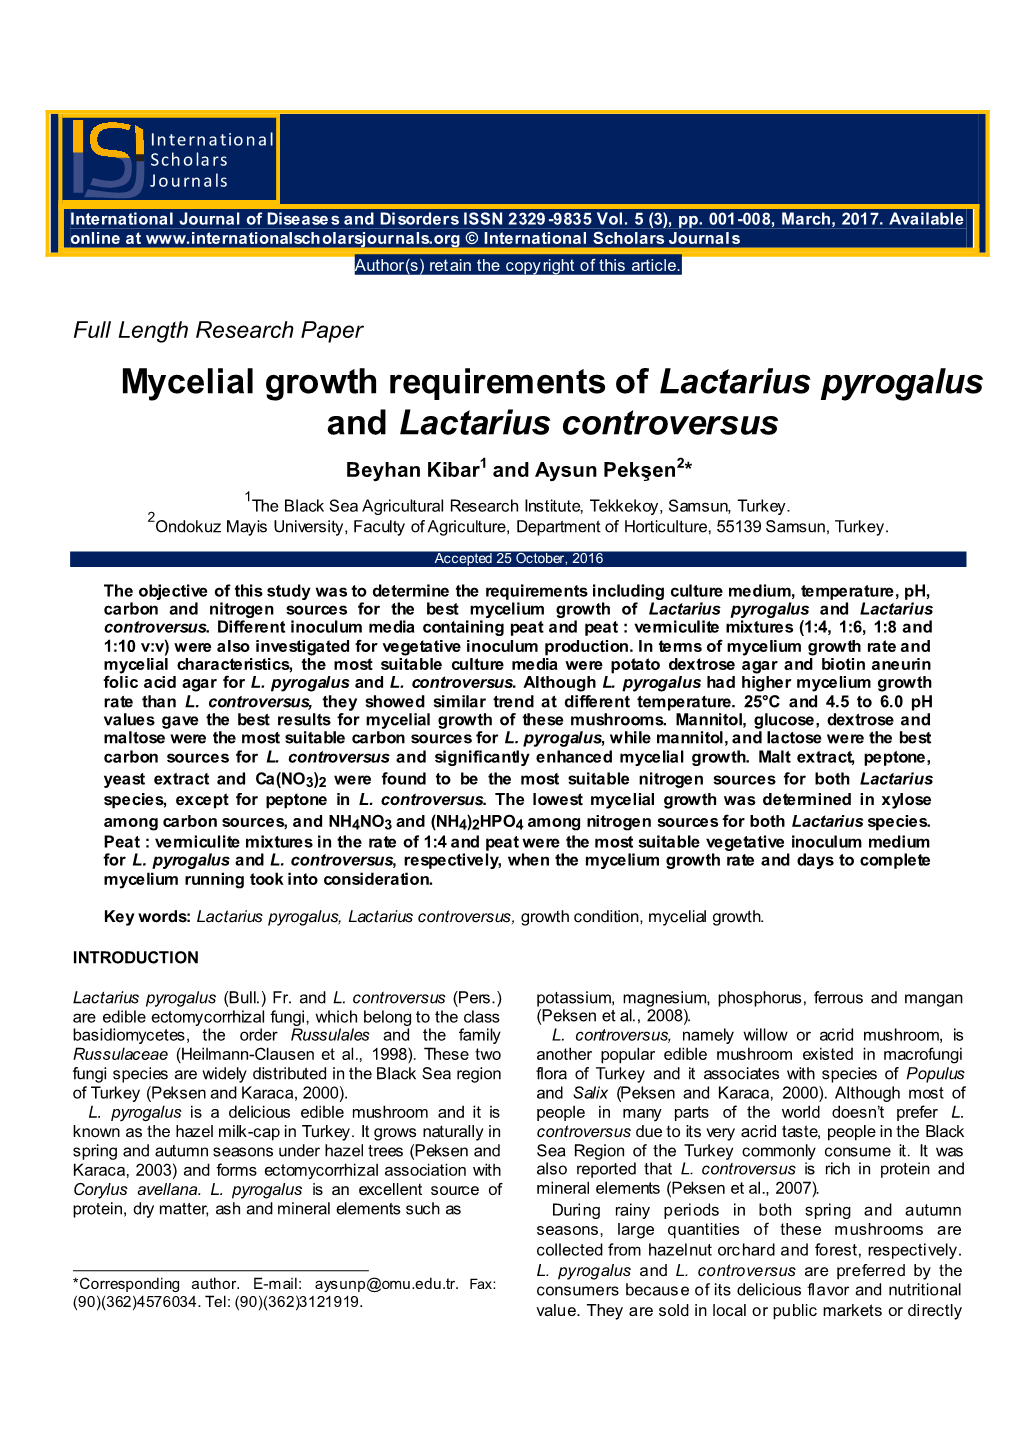 Mycelial Growth Requirements of Lactarius Pyrogalus and Lactarius Controversus